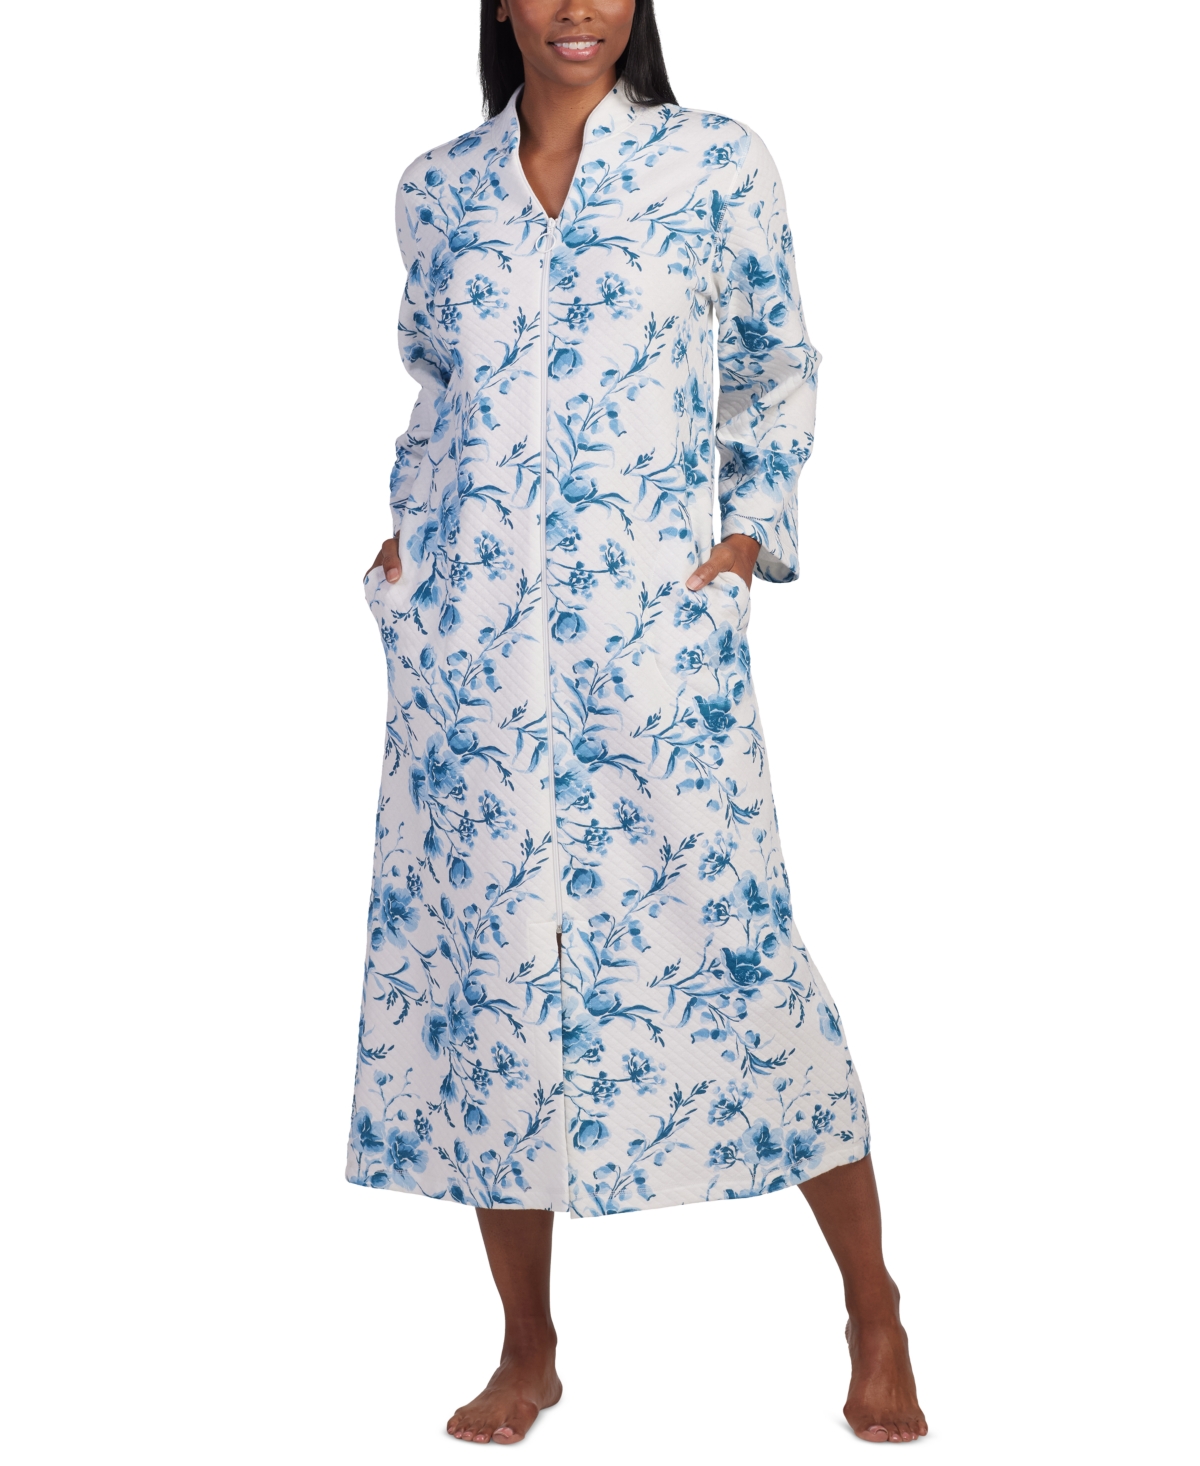 Women's Zip-Front Long-Sleeve Floral Robe - Blue Floral